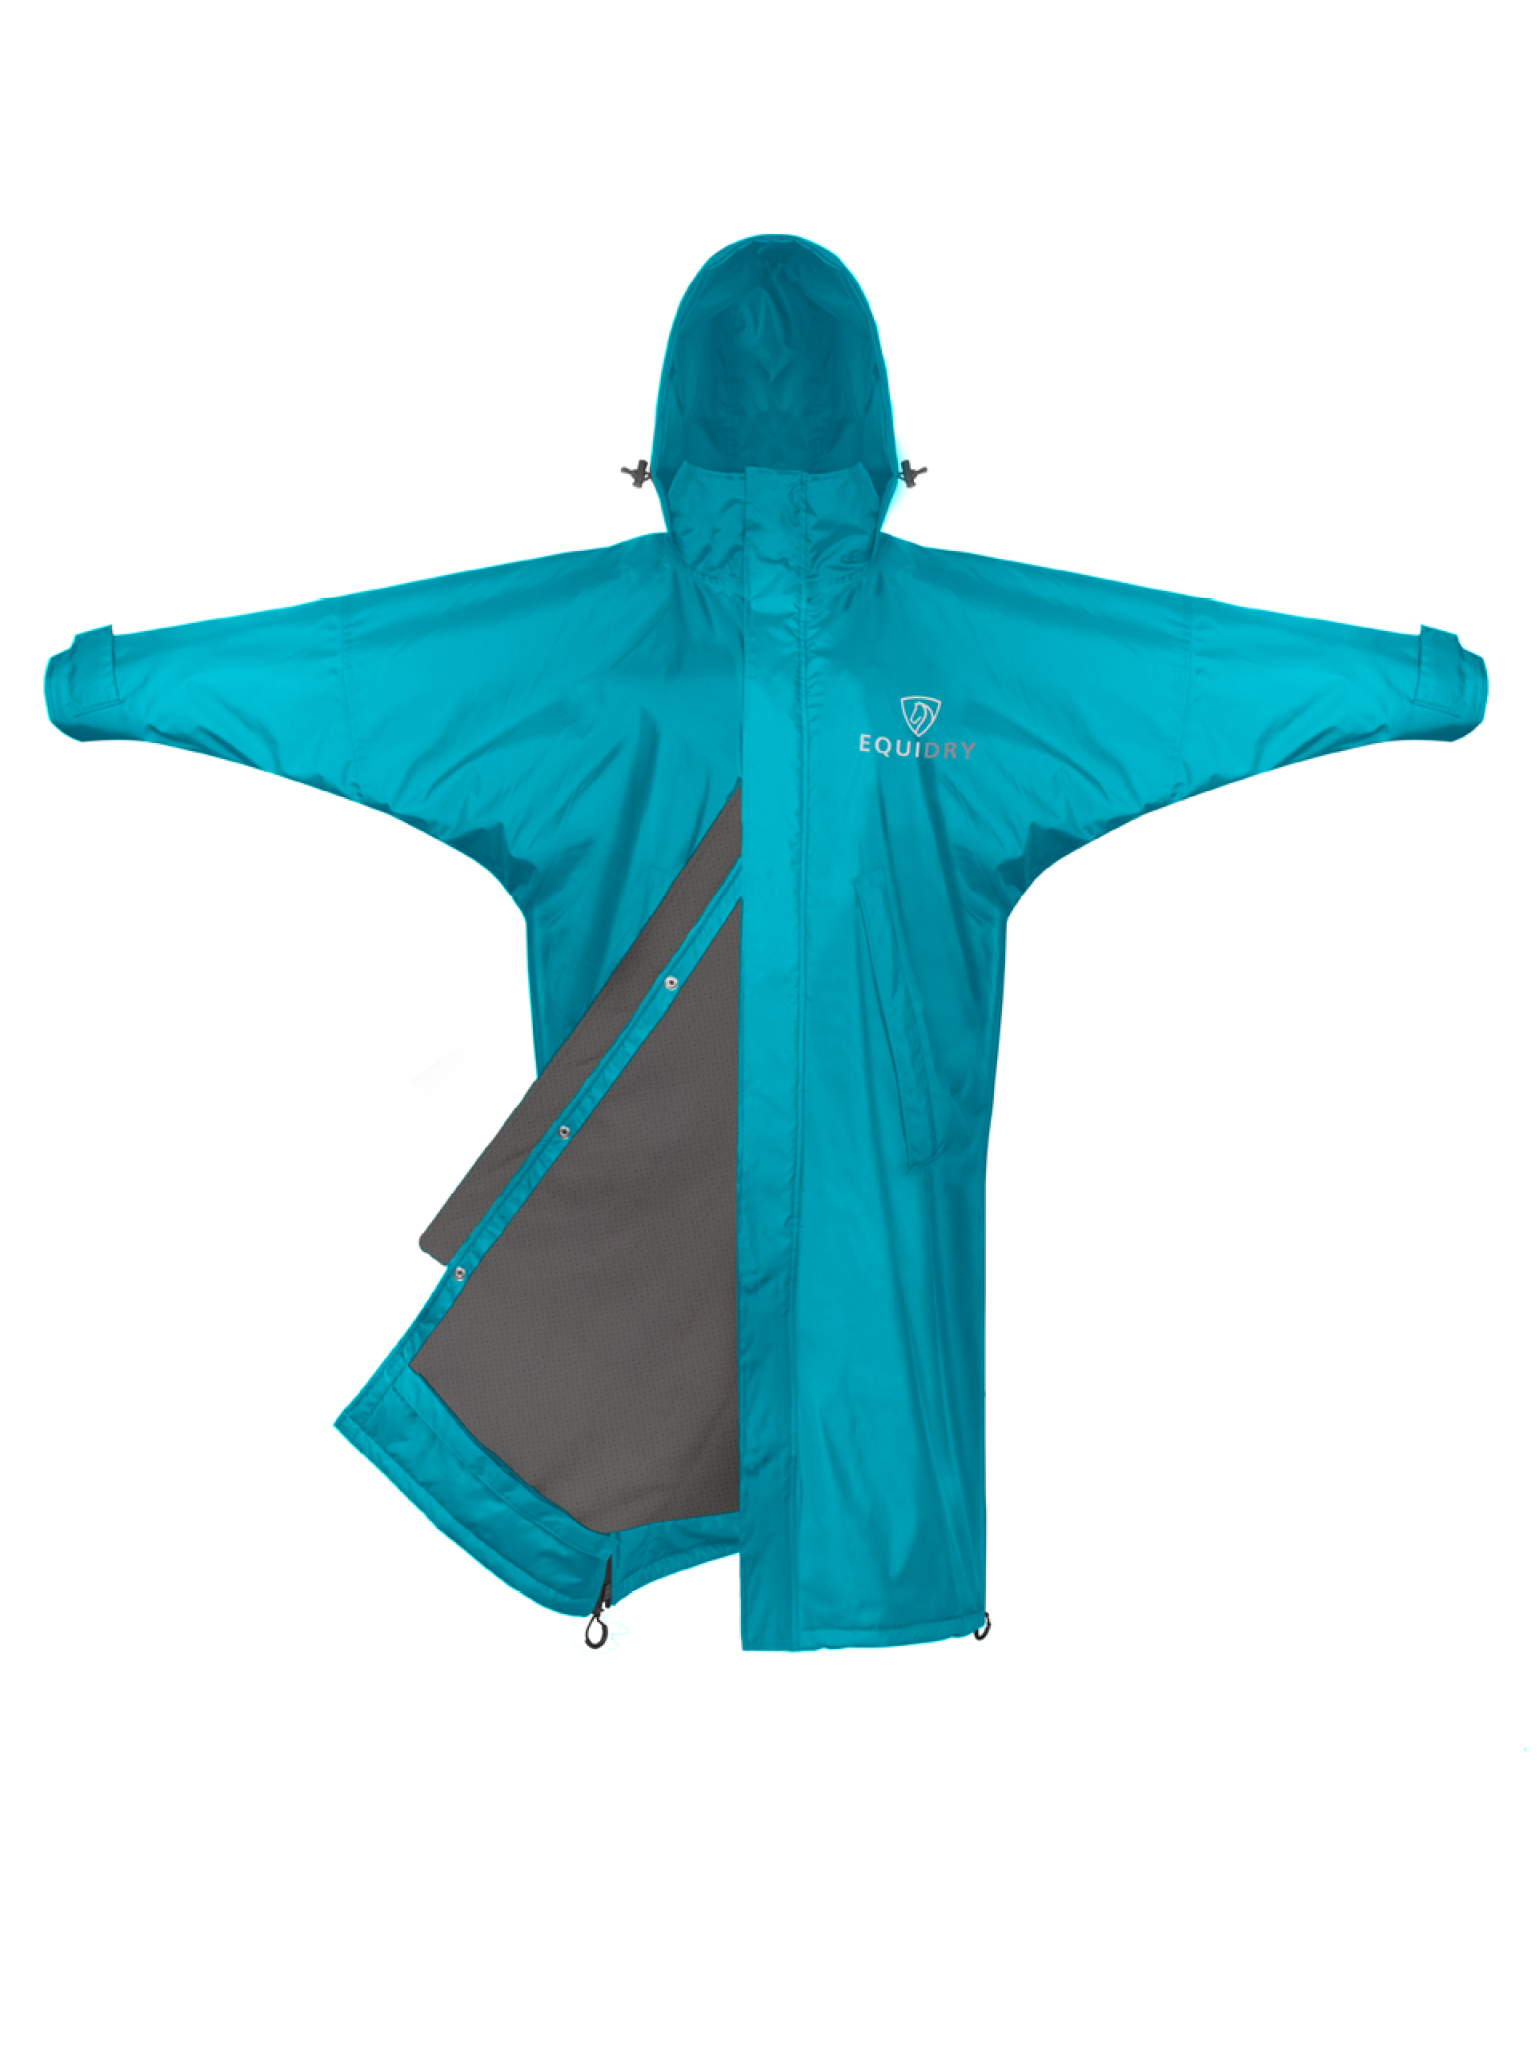 Equimac_turquoise_front.png